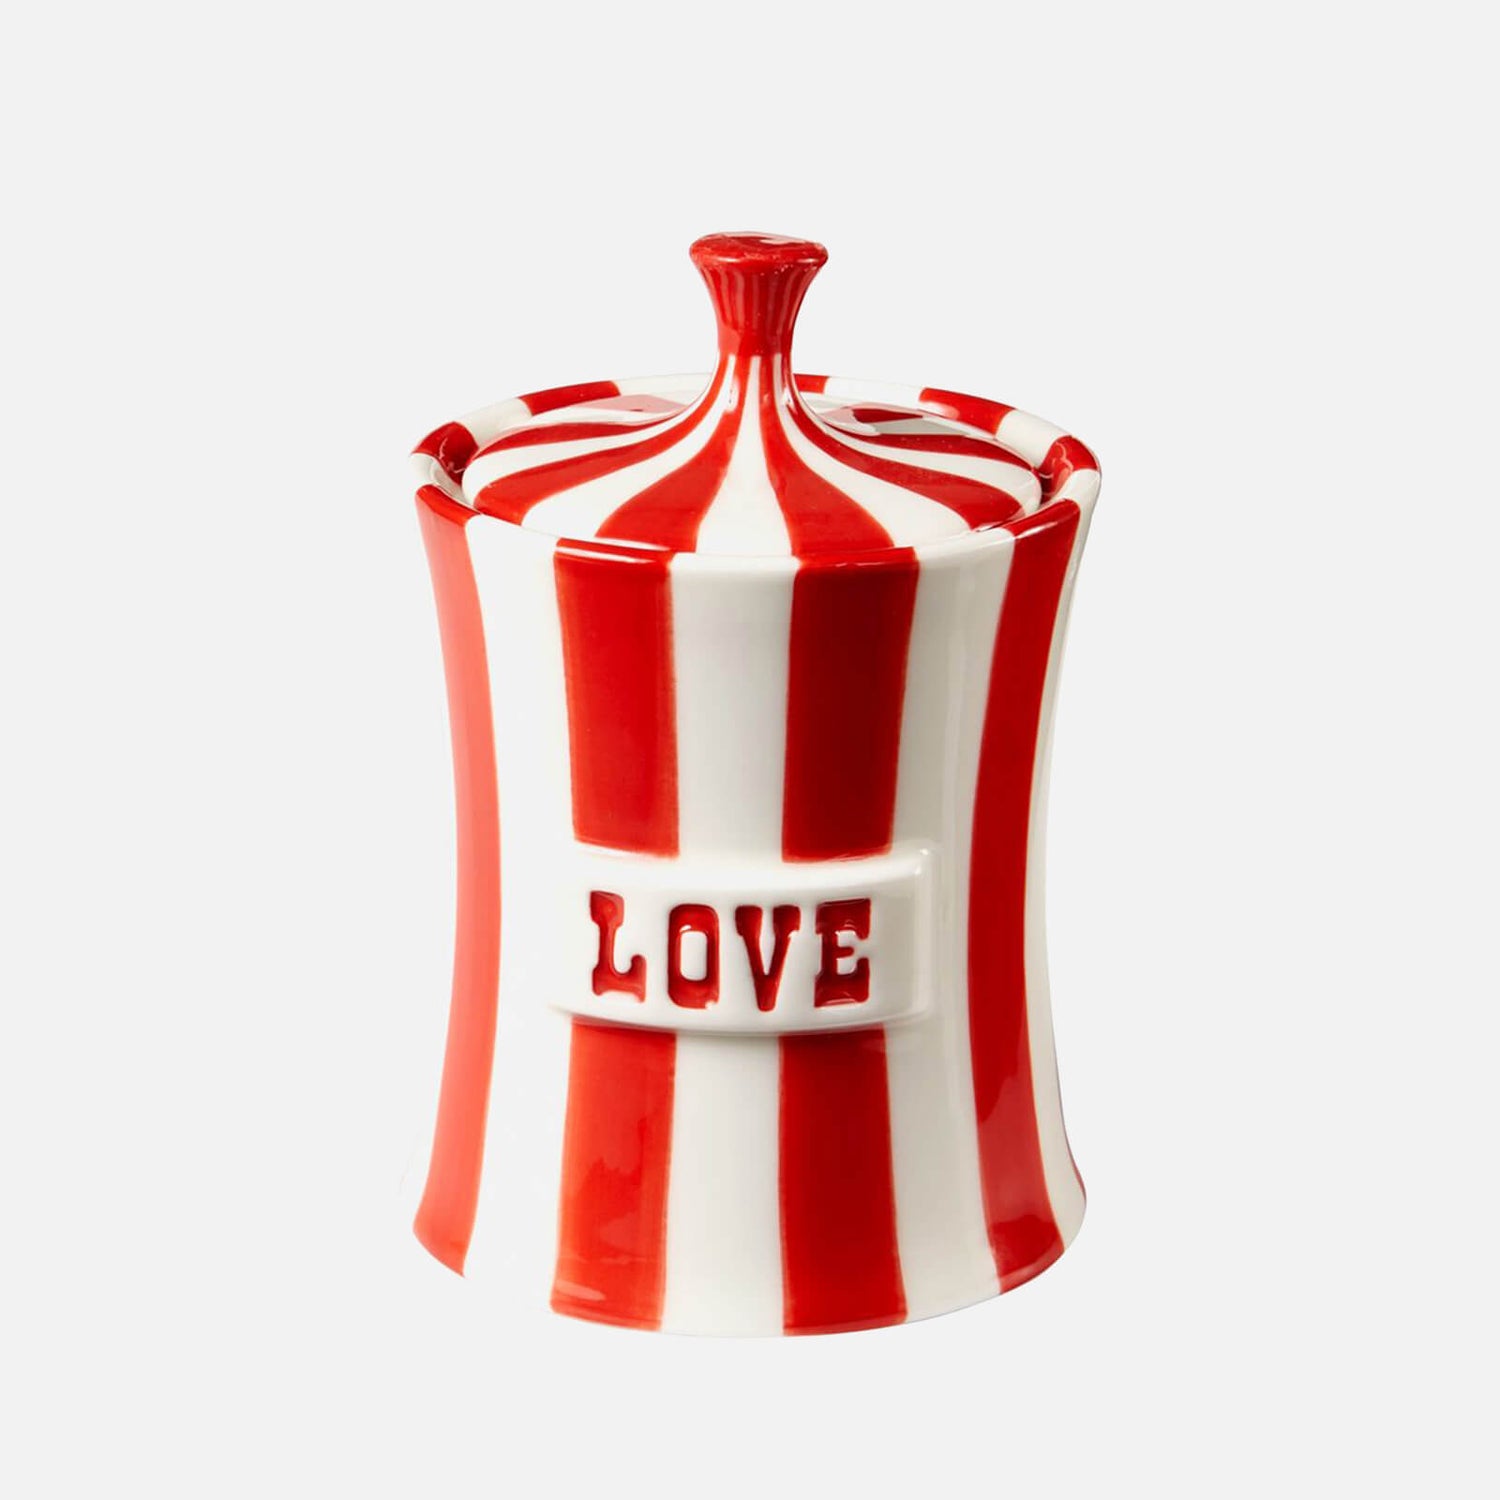 Jonathan Adler Vice Candle - Love - Red